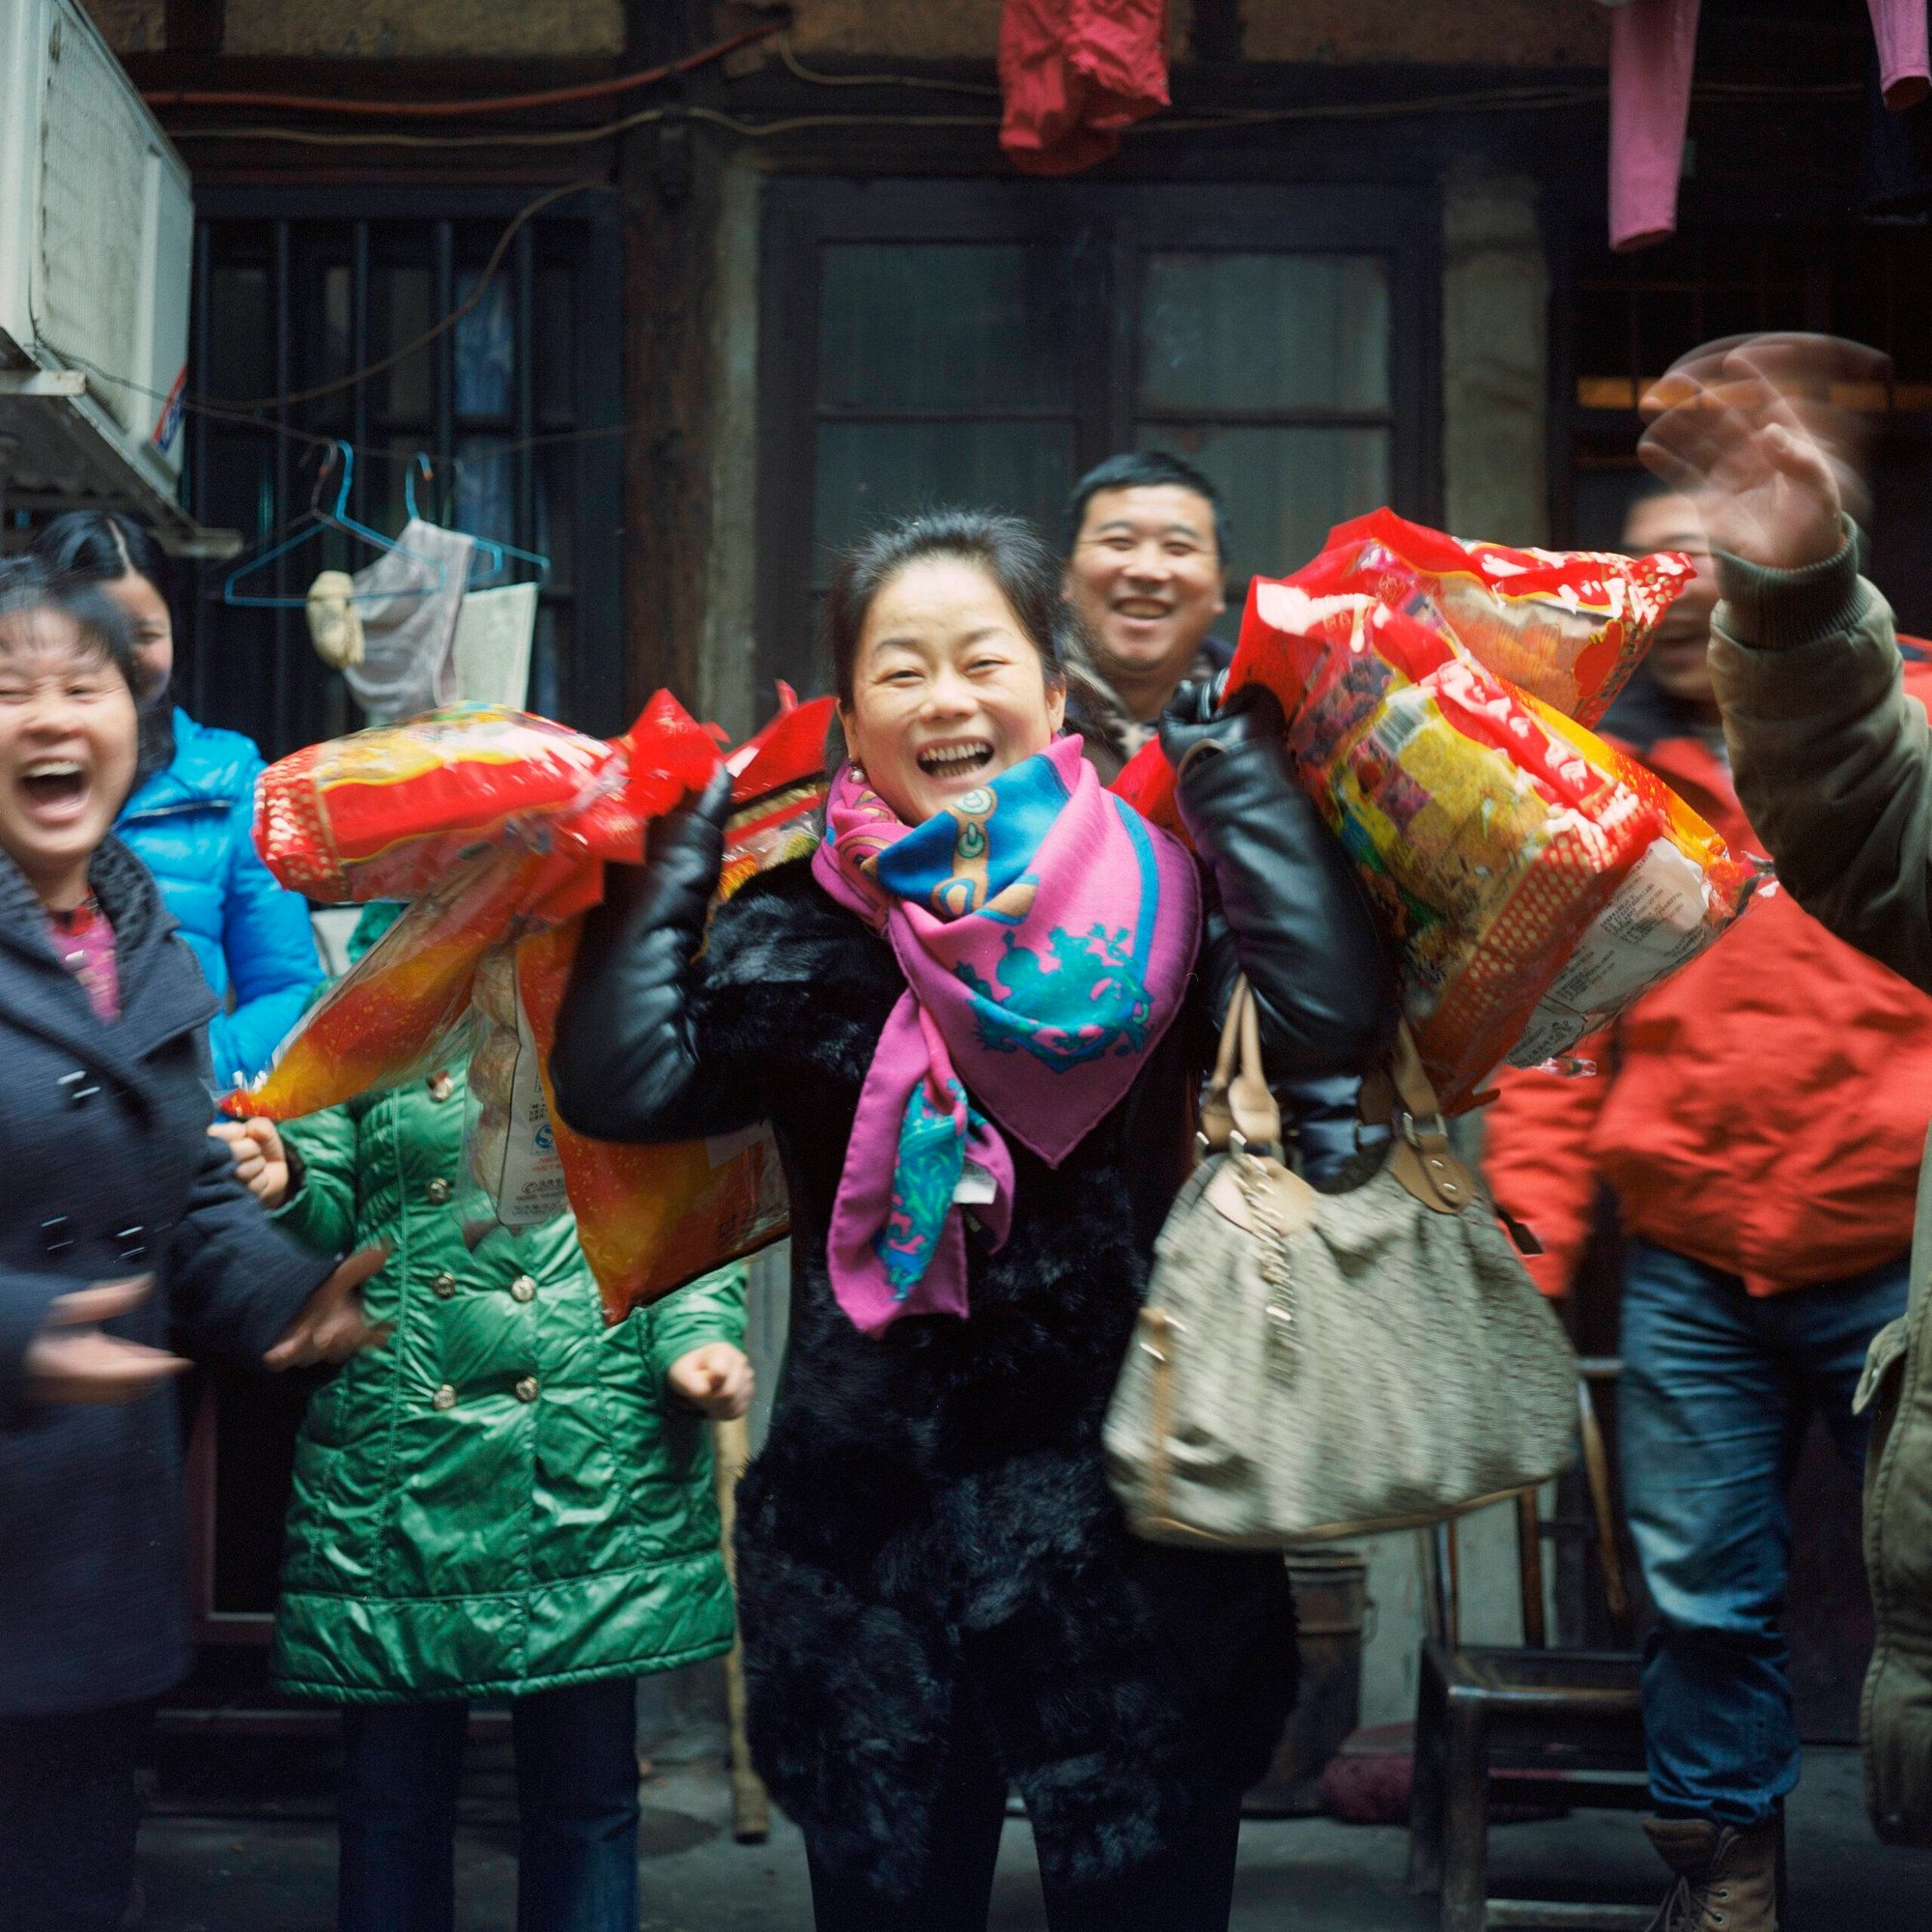 Women Dance Happily With Big Gift Bags